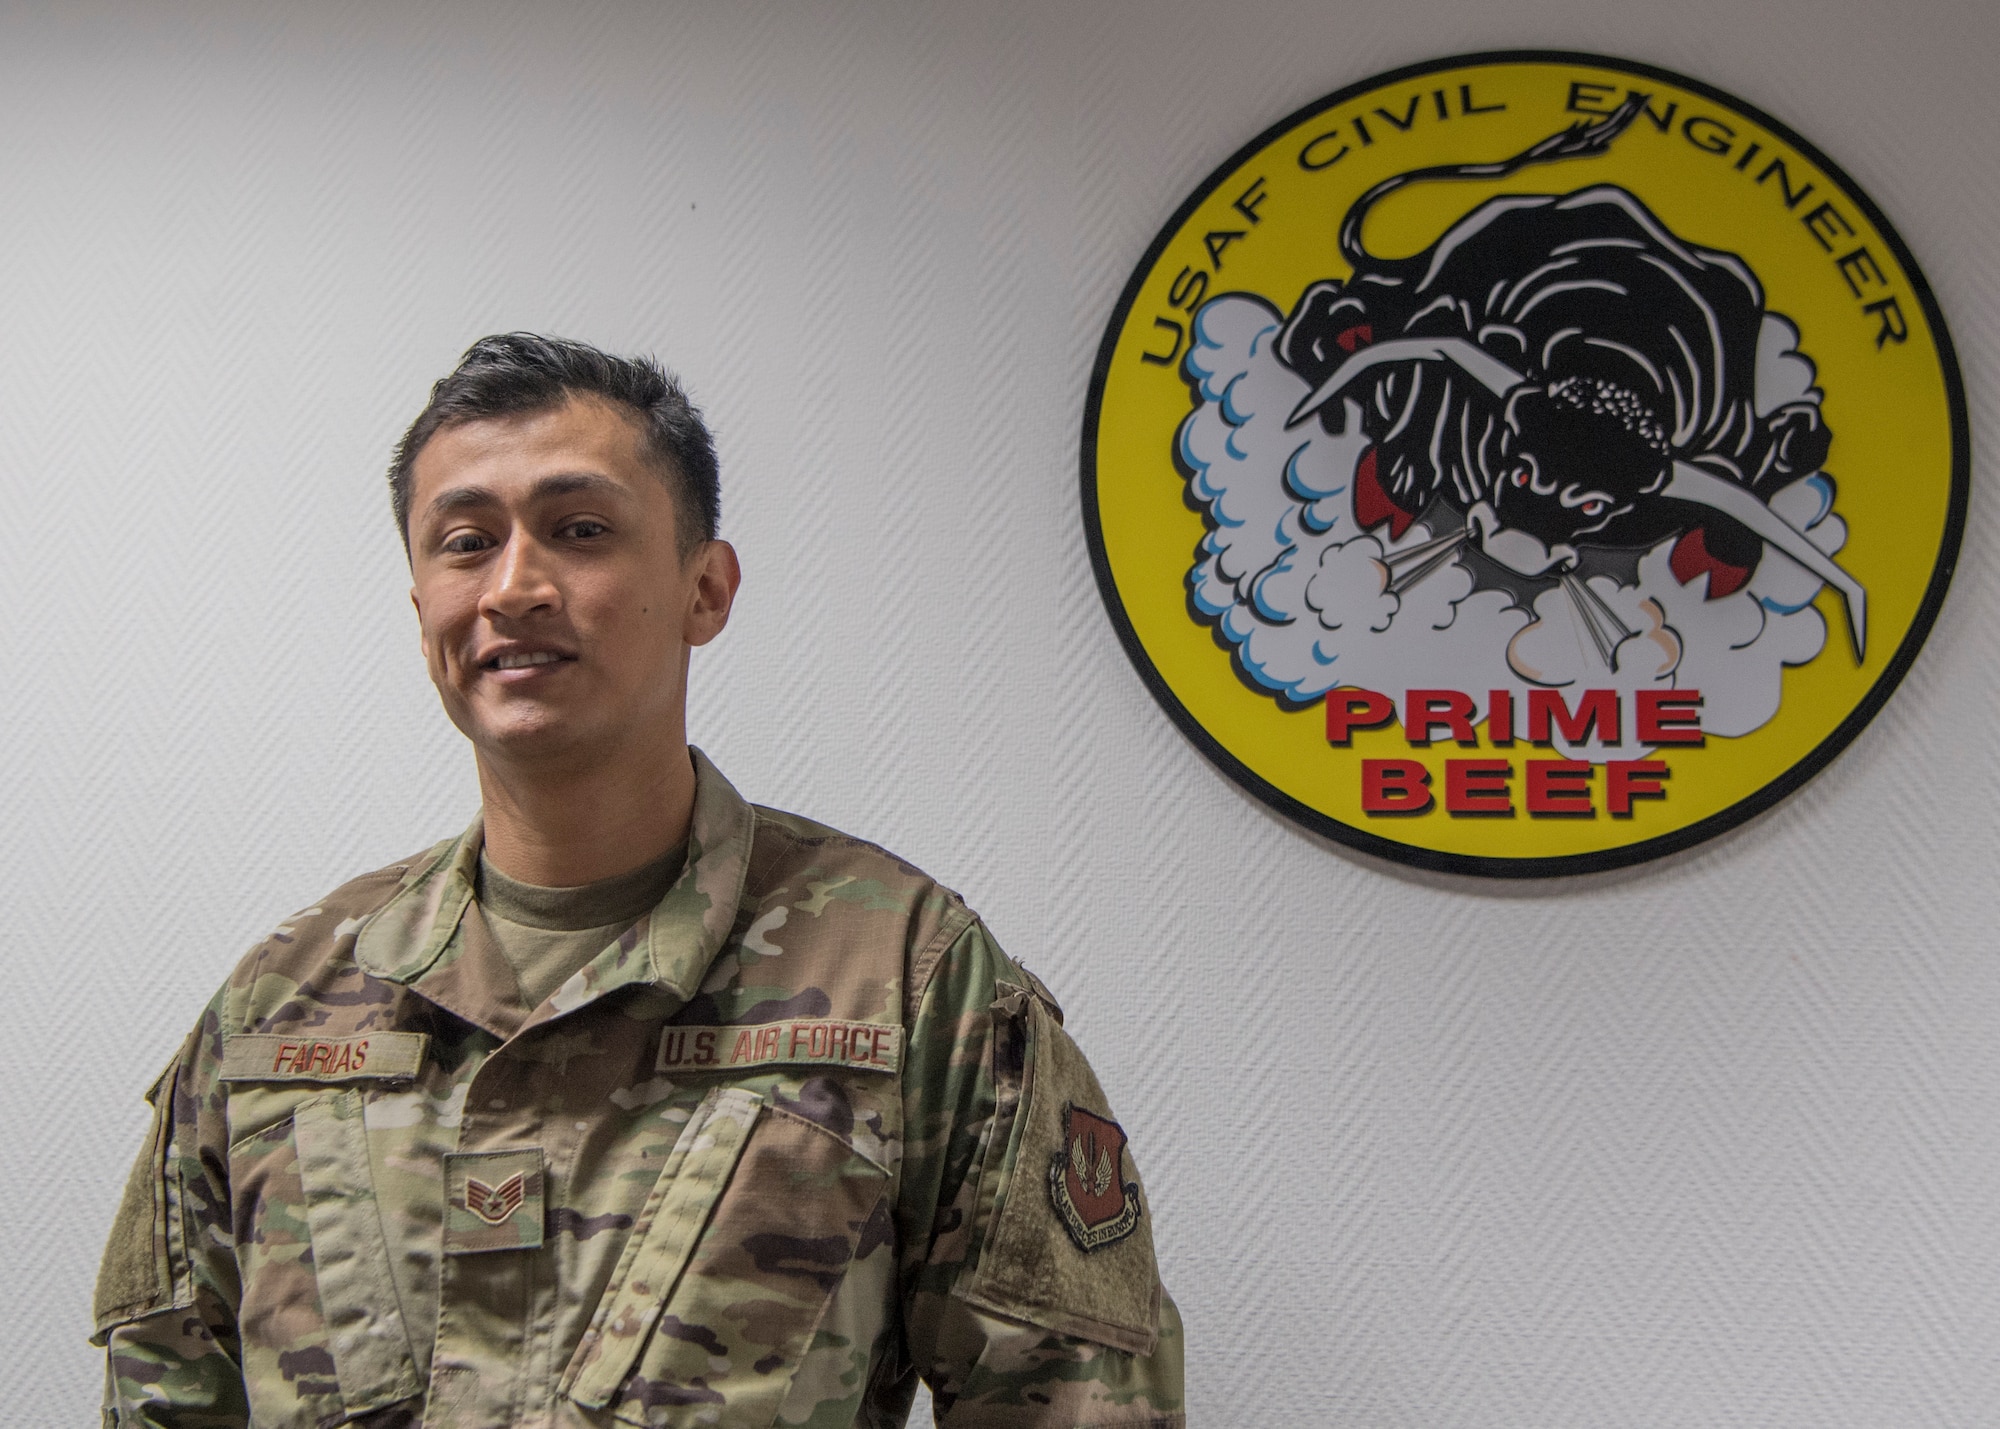 U.S. Air Force Staff Sgt. Abraham Farias, 786th Civil Engineer Squadron expeditionary engineering training manager, poses for a photo at Ramstein Air Base, Germany, April 23, 2020